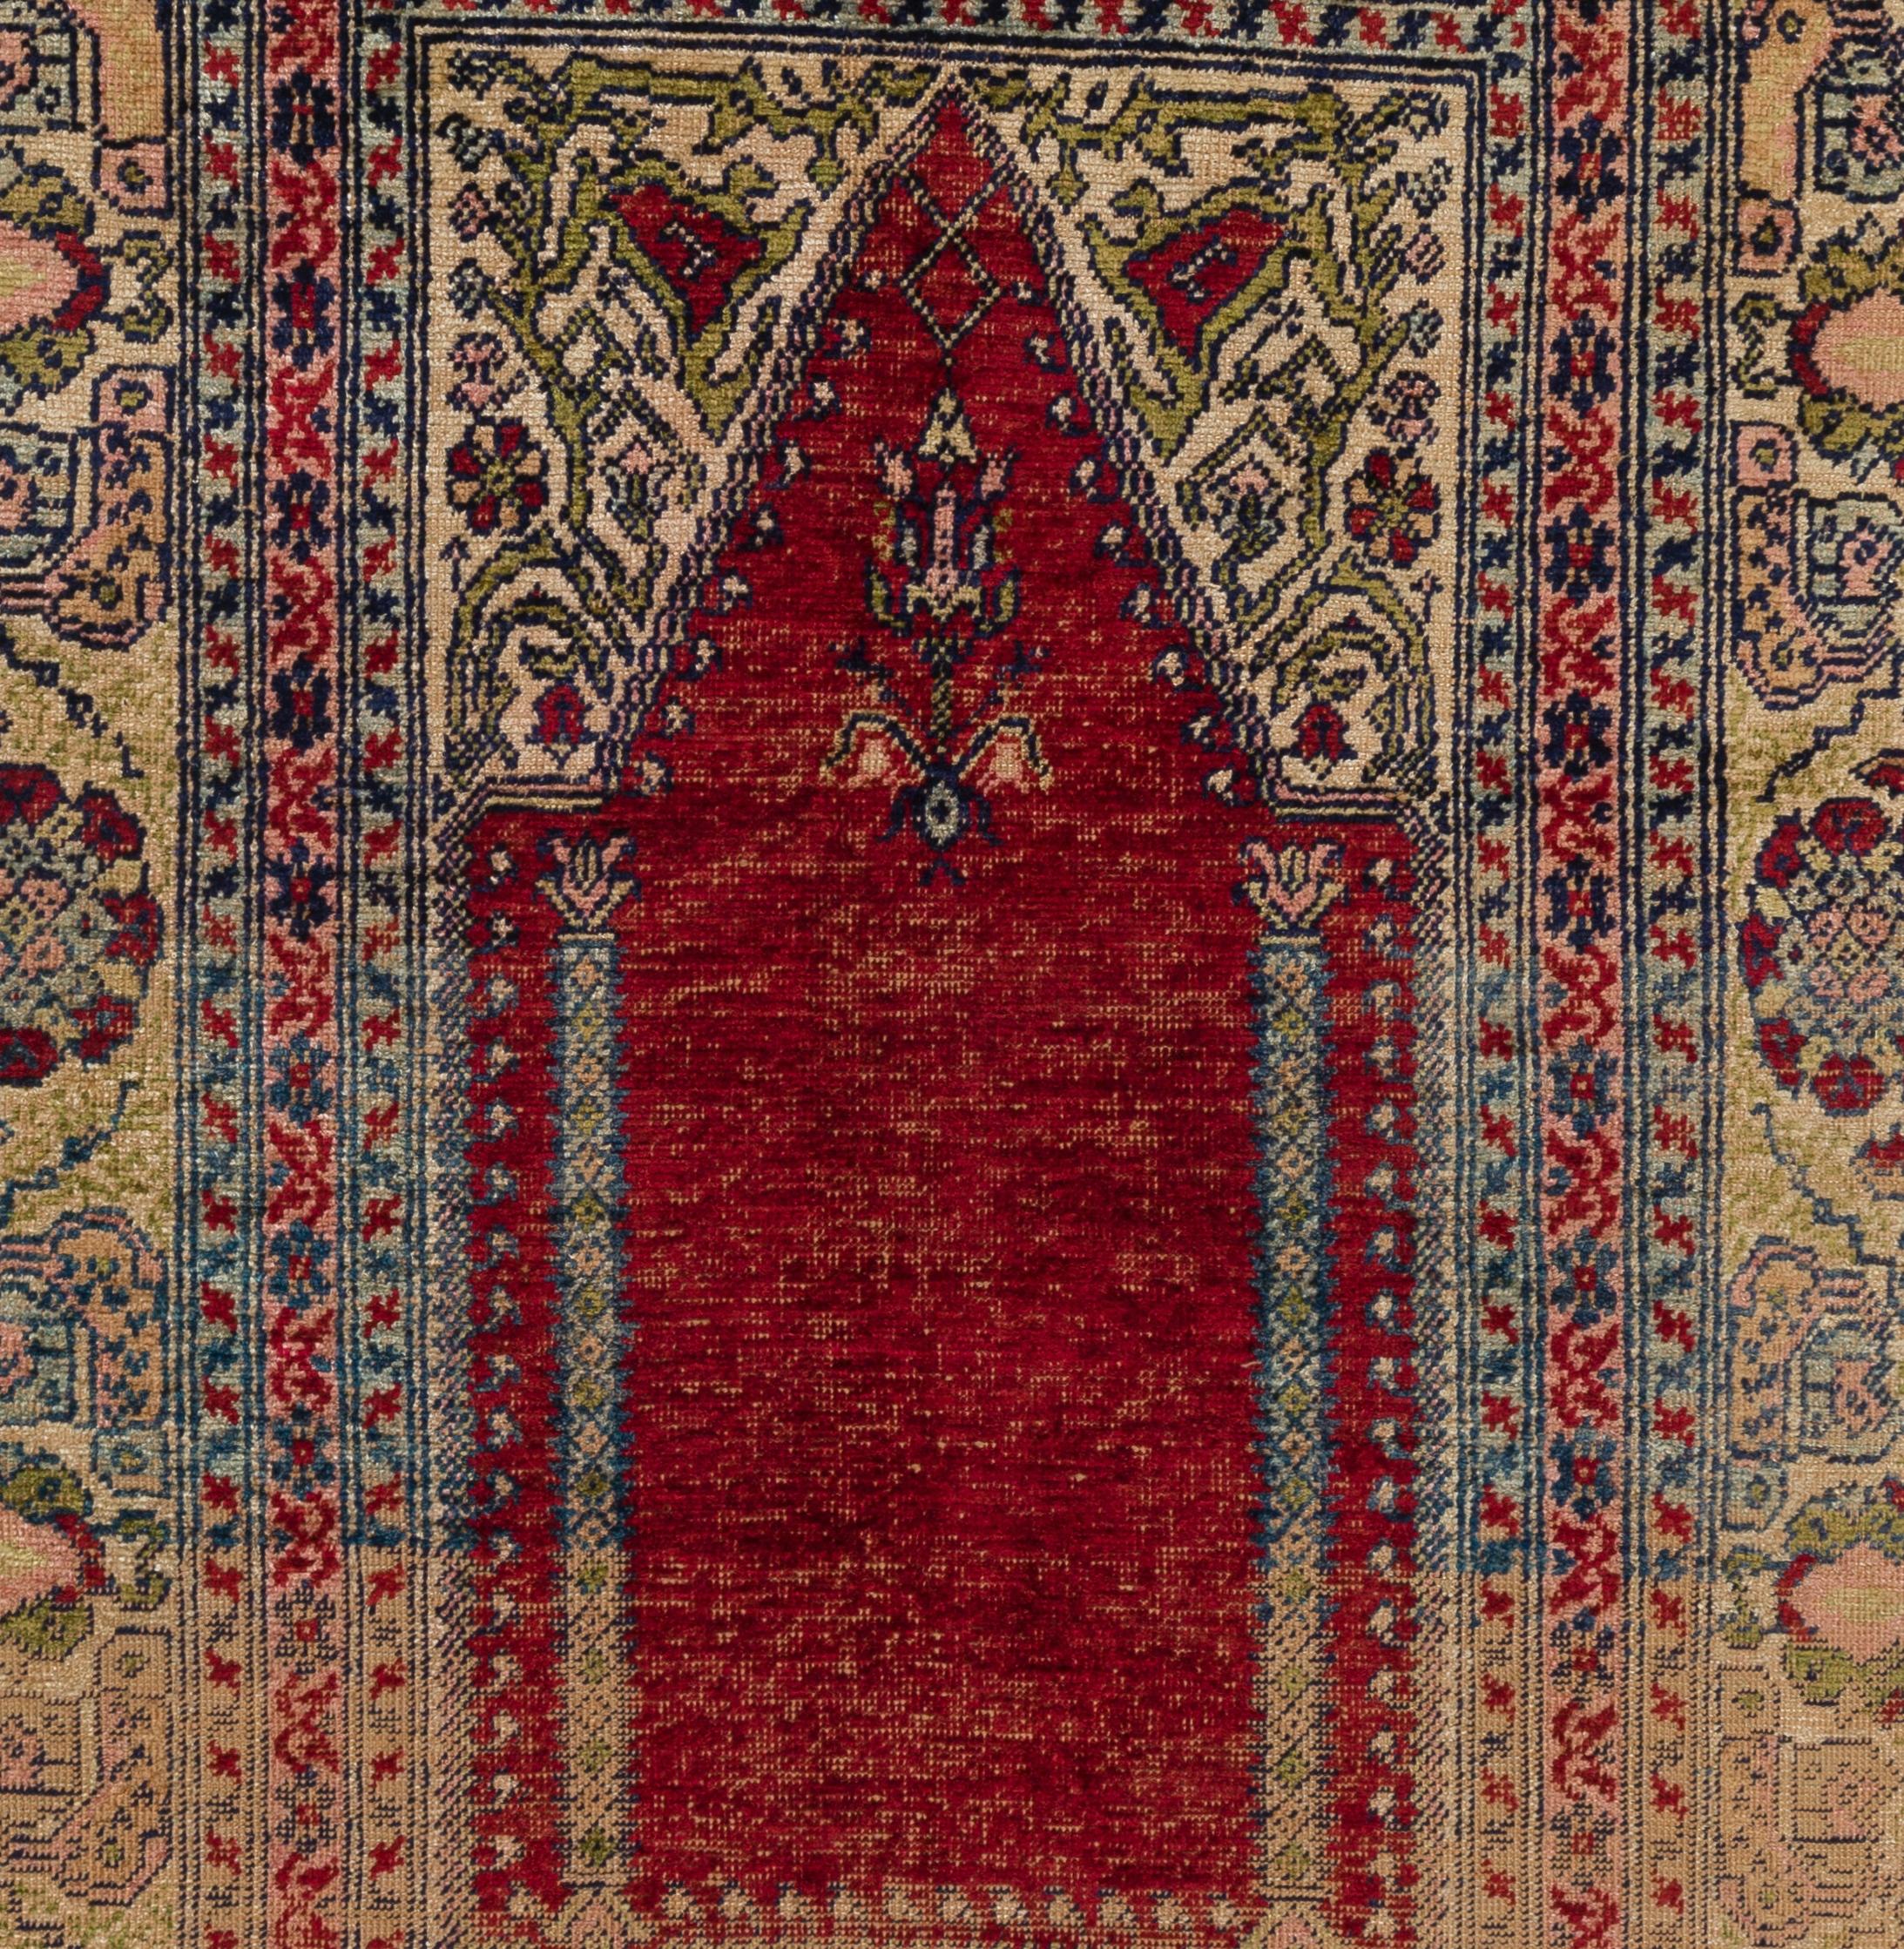 An antique niche design silk rug from Kayseri region of Central Anatolia, circa 1910. Very good condition. Sturdy and as clean as a brand new rug (deep washed professionally).
Size: 3.7 x 5.4 ft.